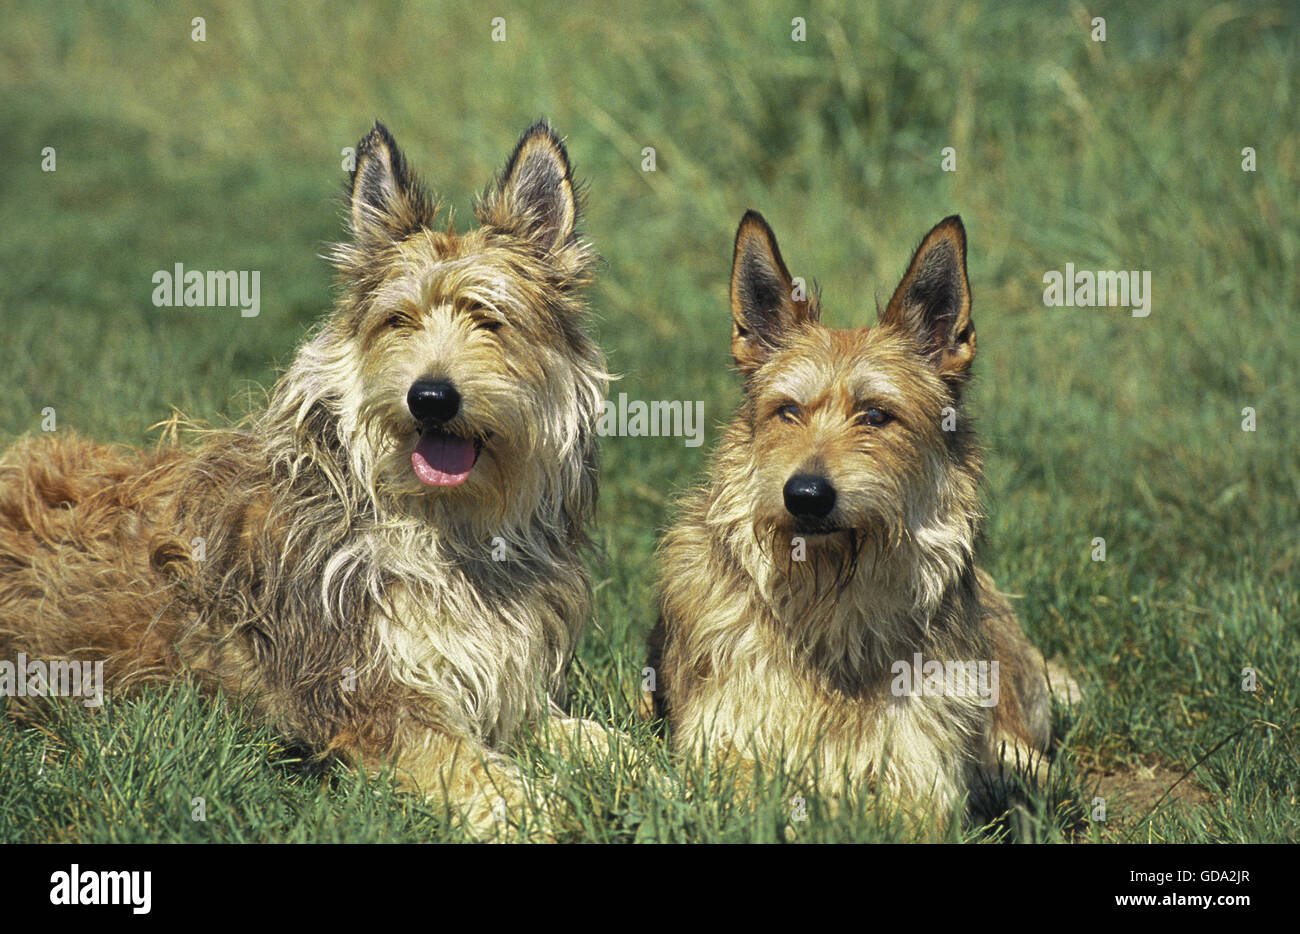 Picardy Shepherd Dog, Adults laying on Grass Stock Photo